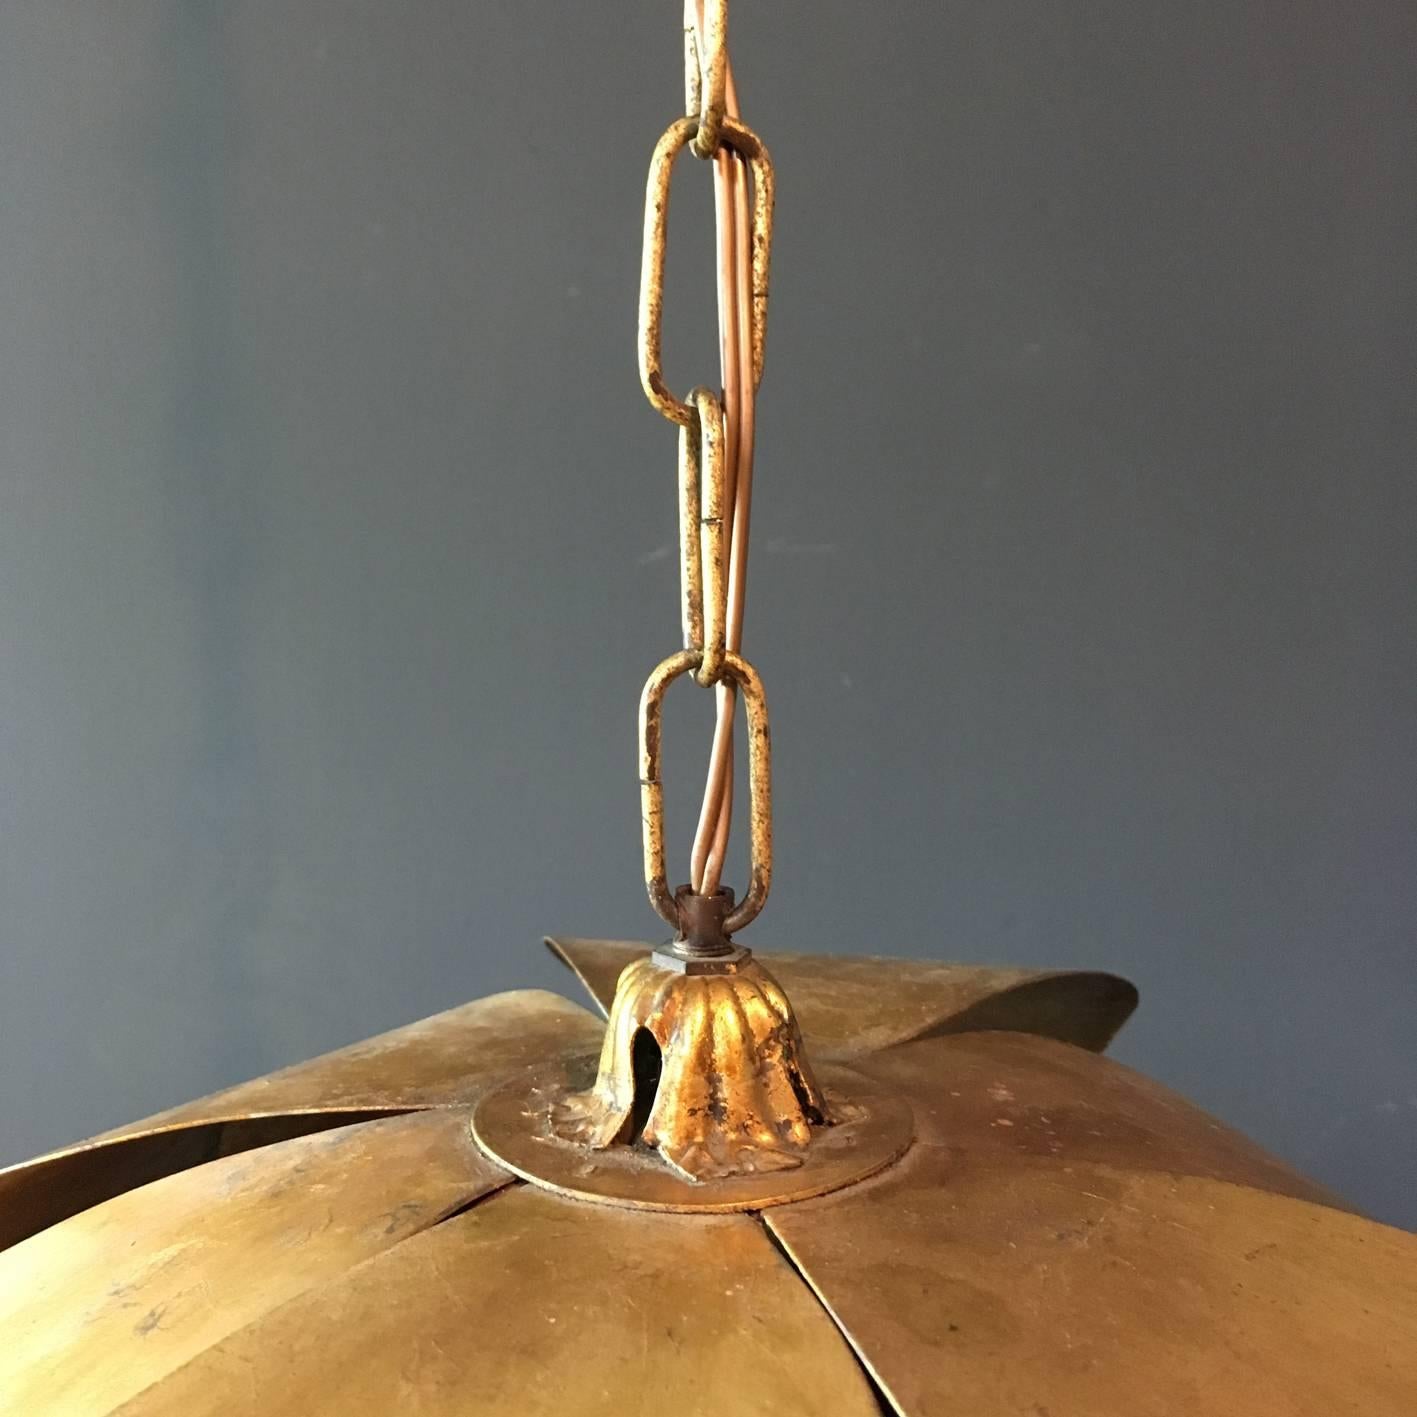 Hand-Crafted Huge Handcrafted Brass Lotus Flower Ceiling Light, circa 1970s